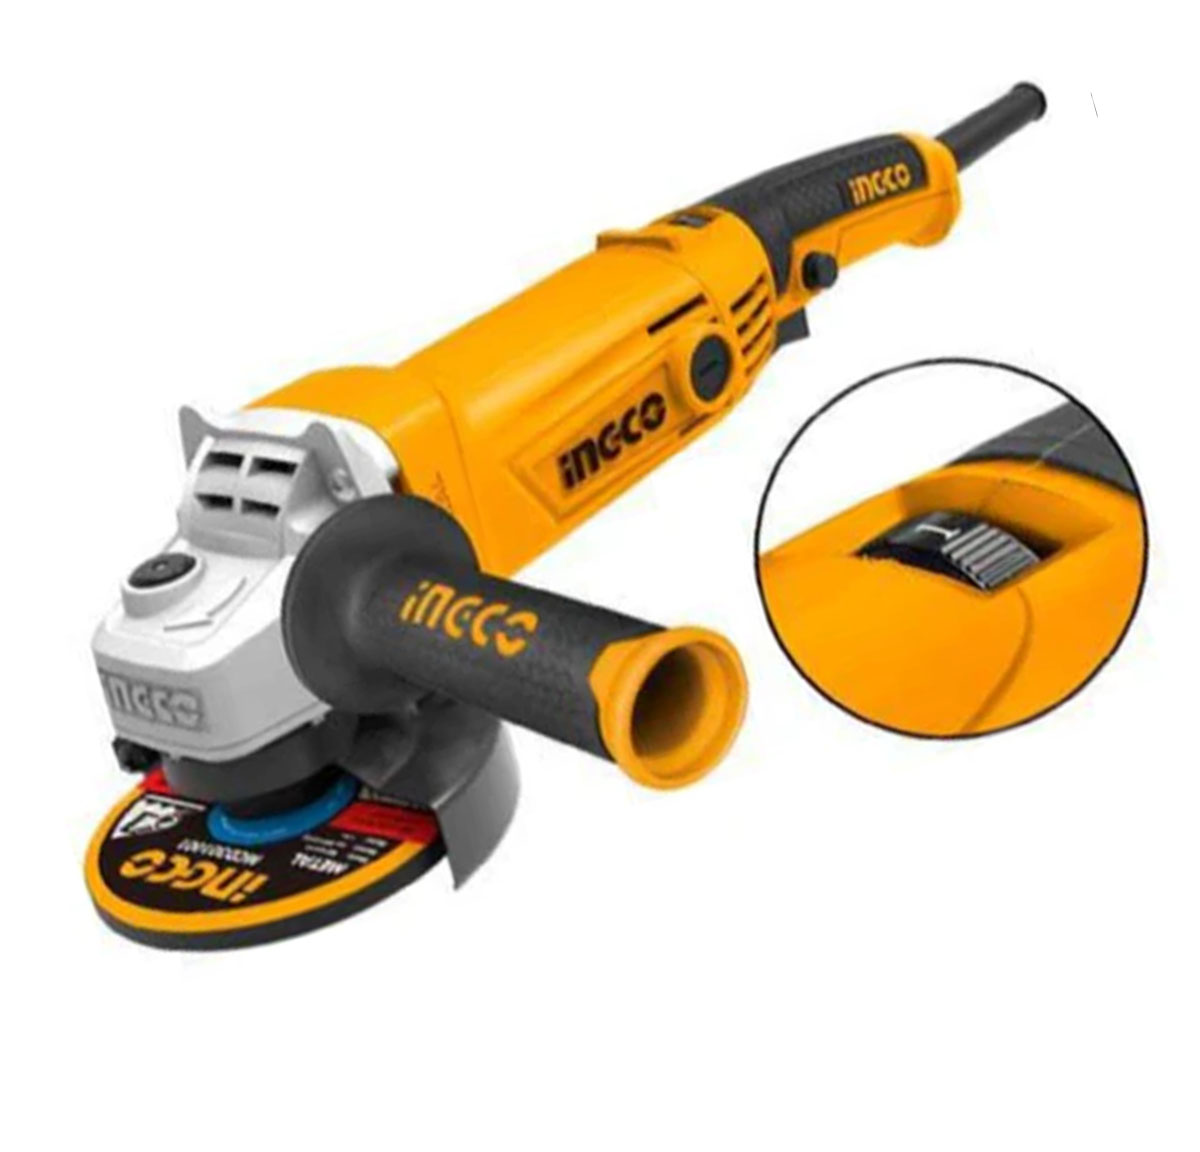 Ingco Angle grinder 1010W 125mm Variable speed AG10108-5